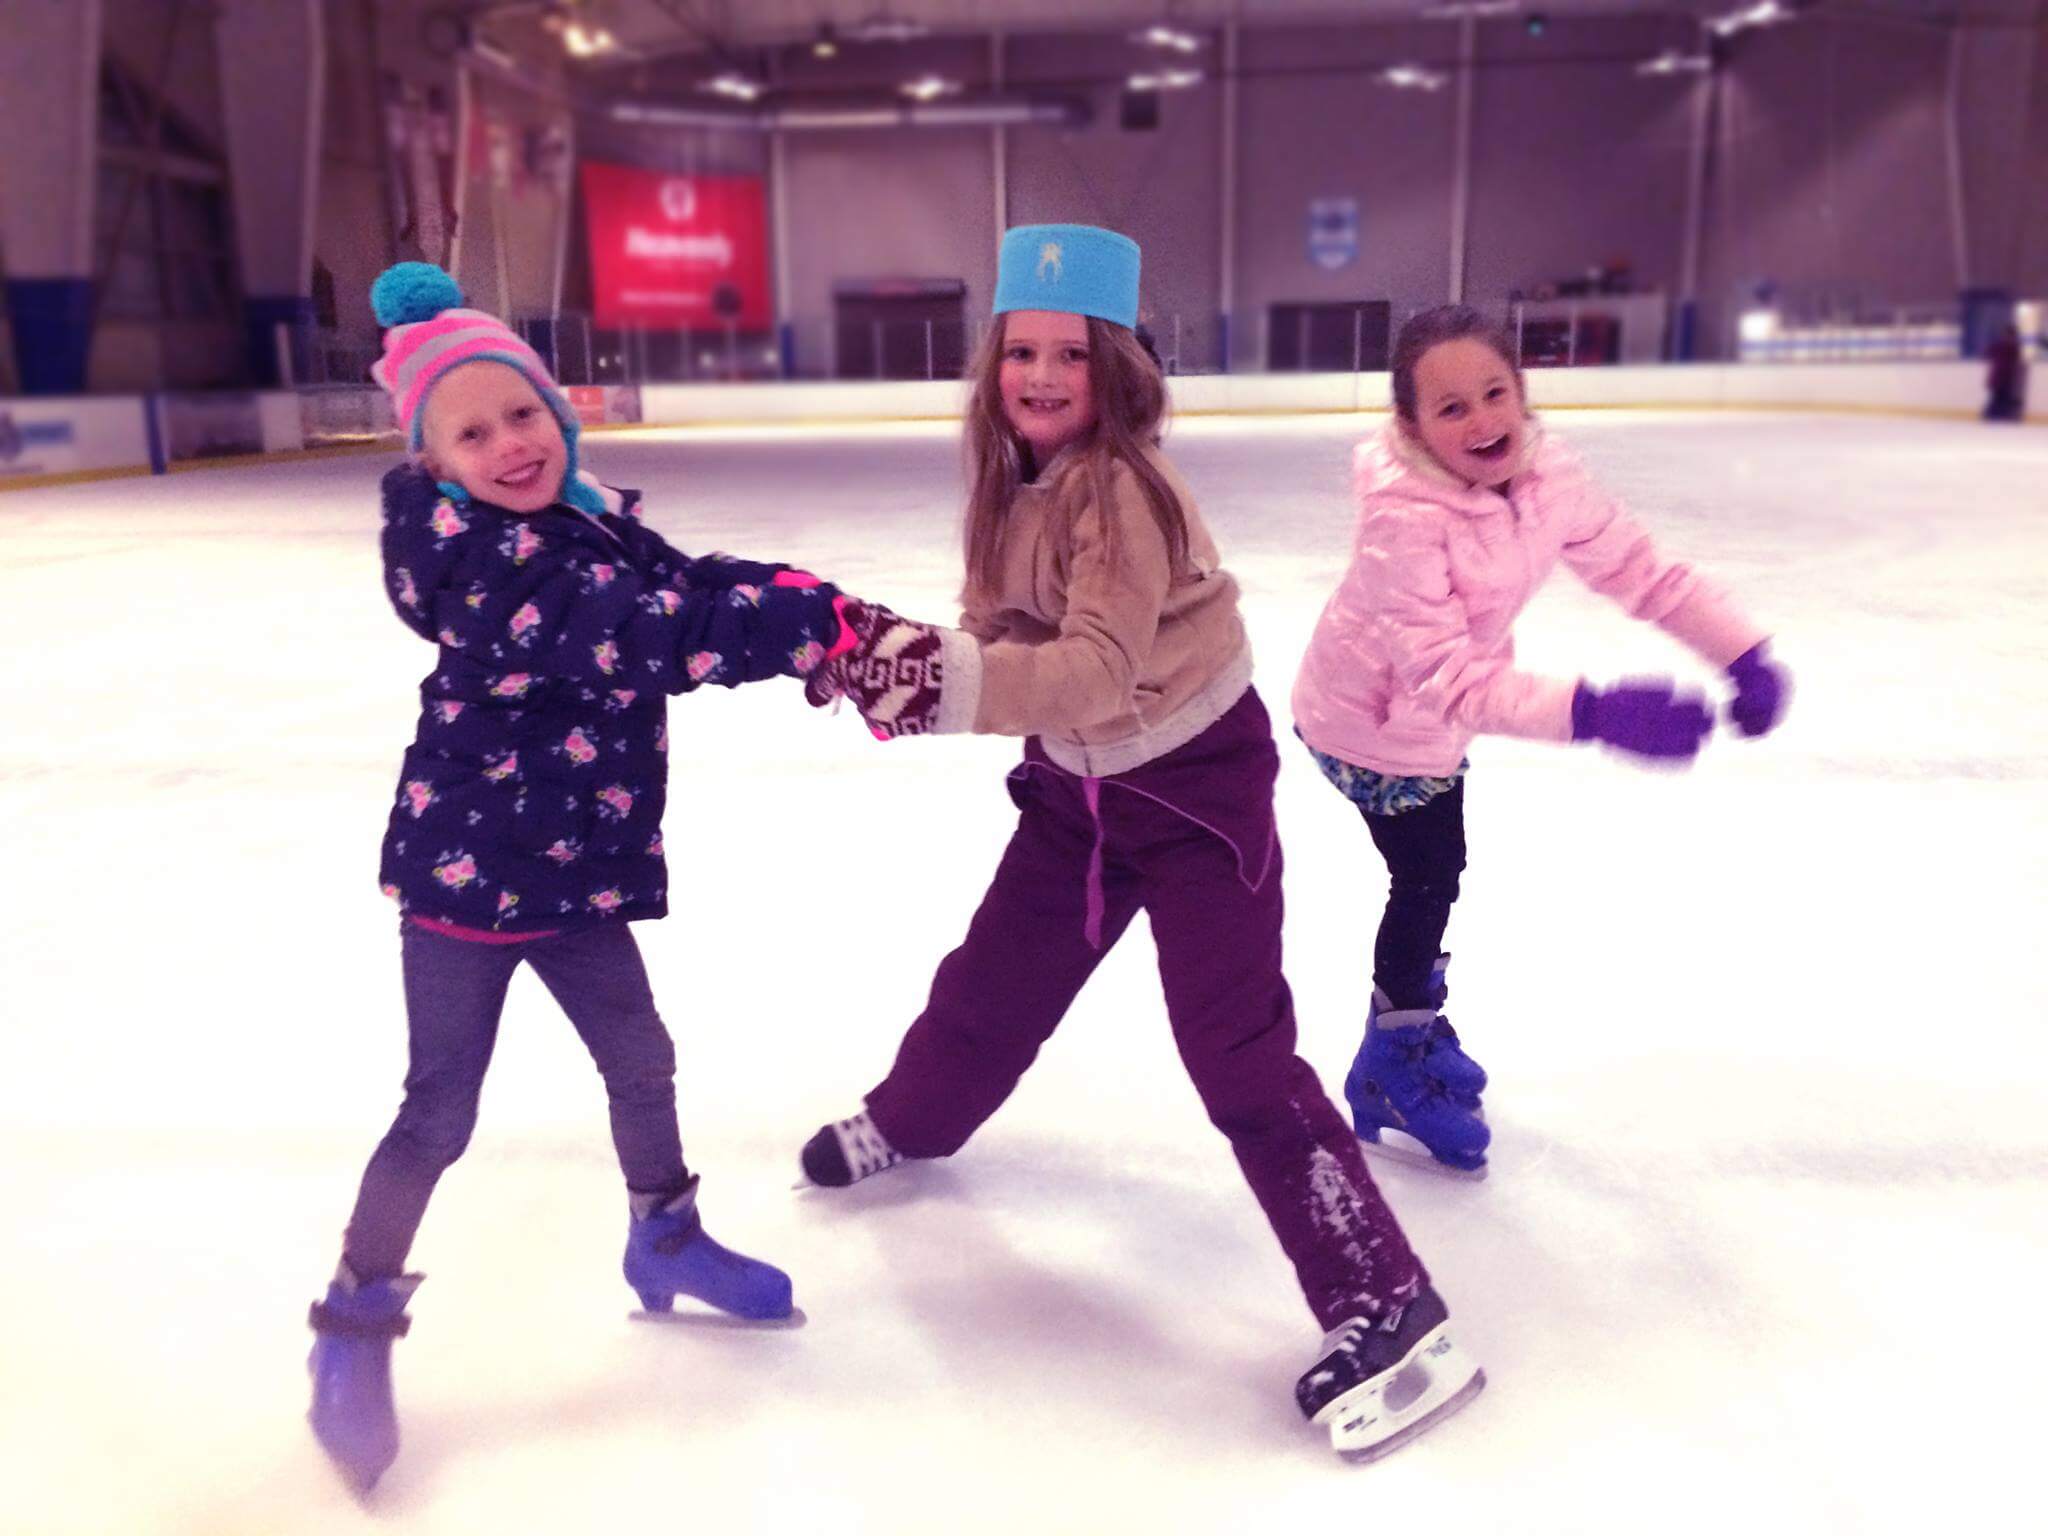 5 things to do if you're under 21 - Ice Skating